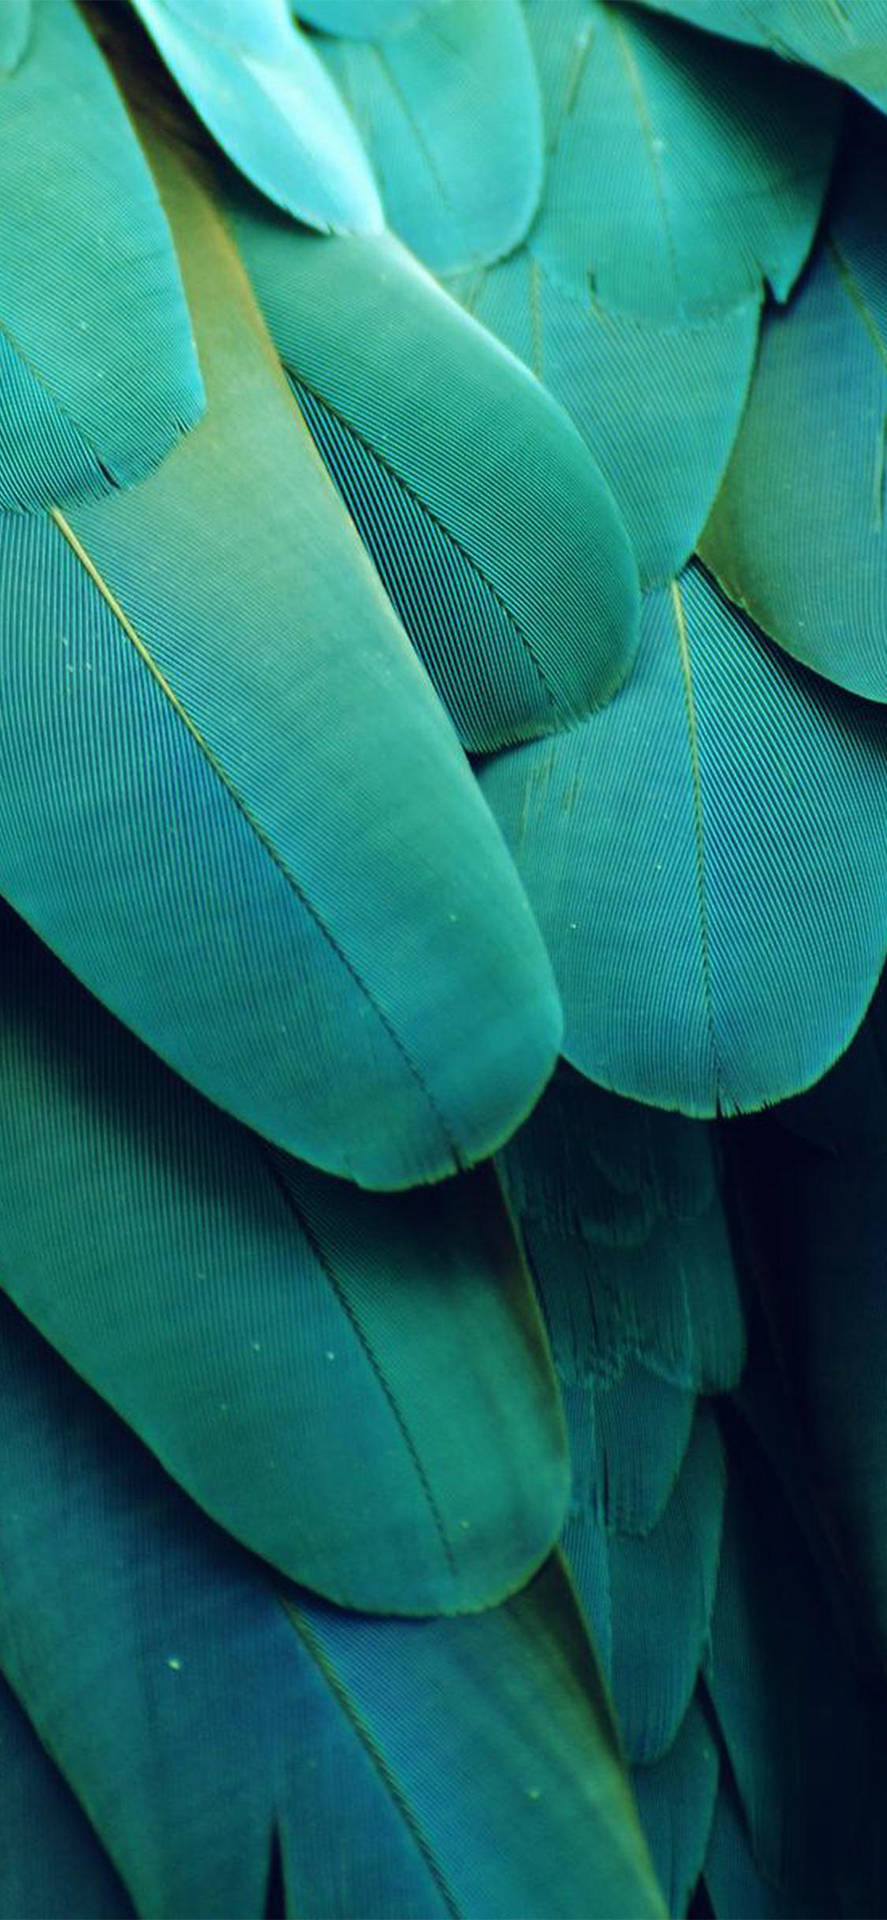 Feather Macro Photography Aesthetic Teal Background